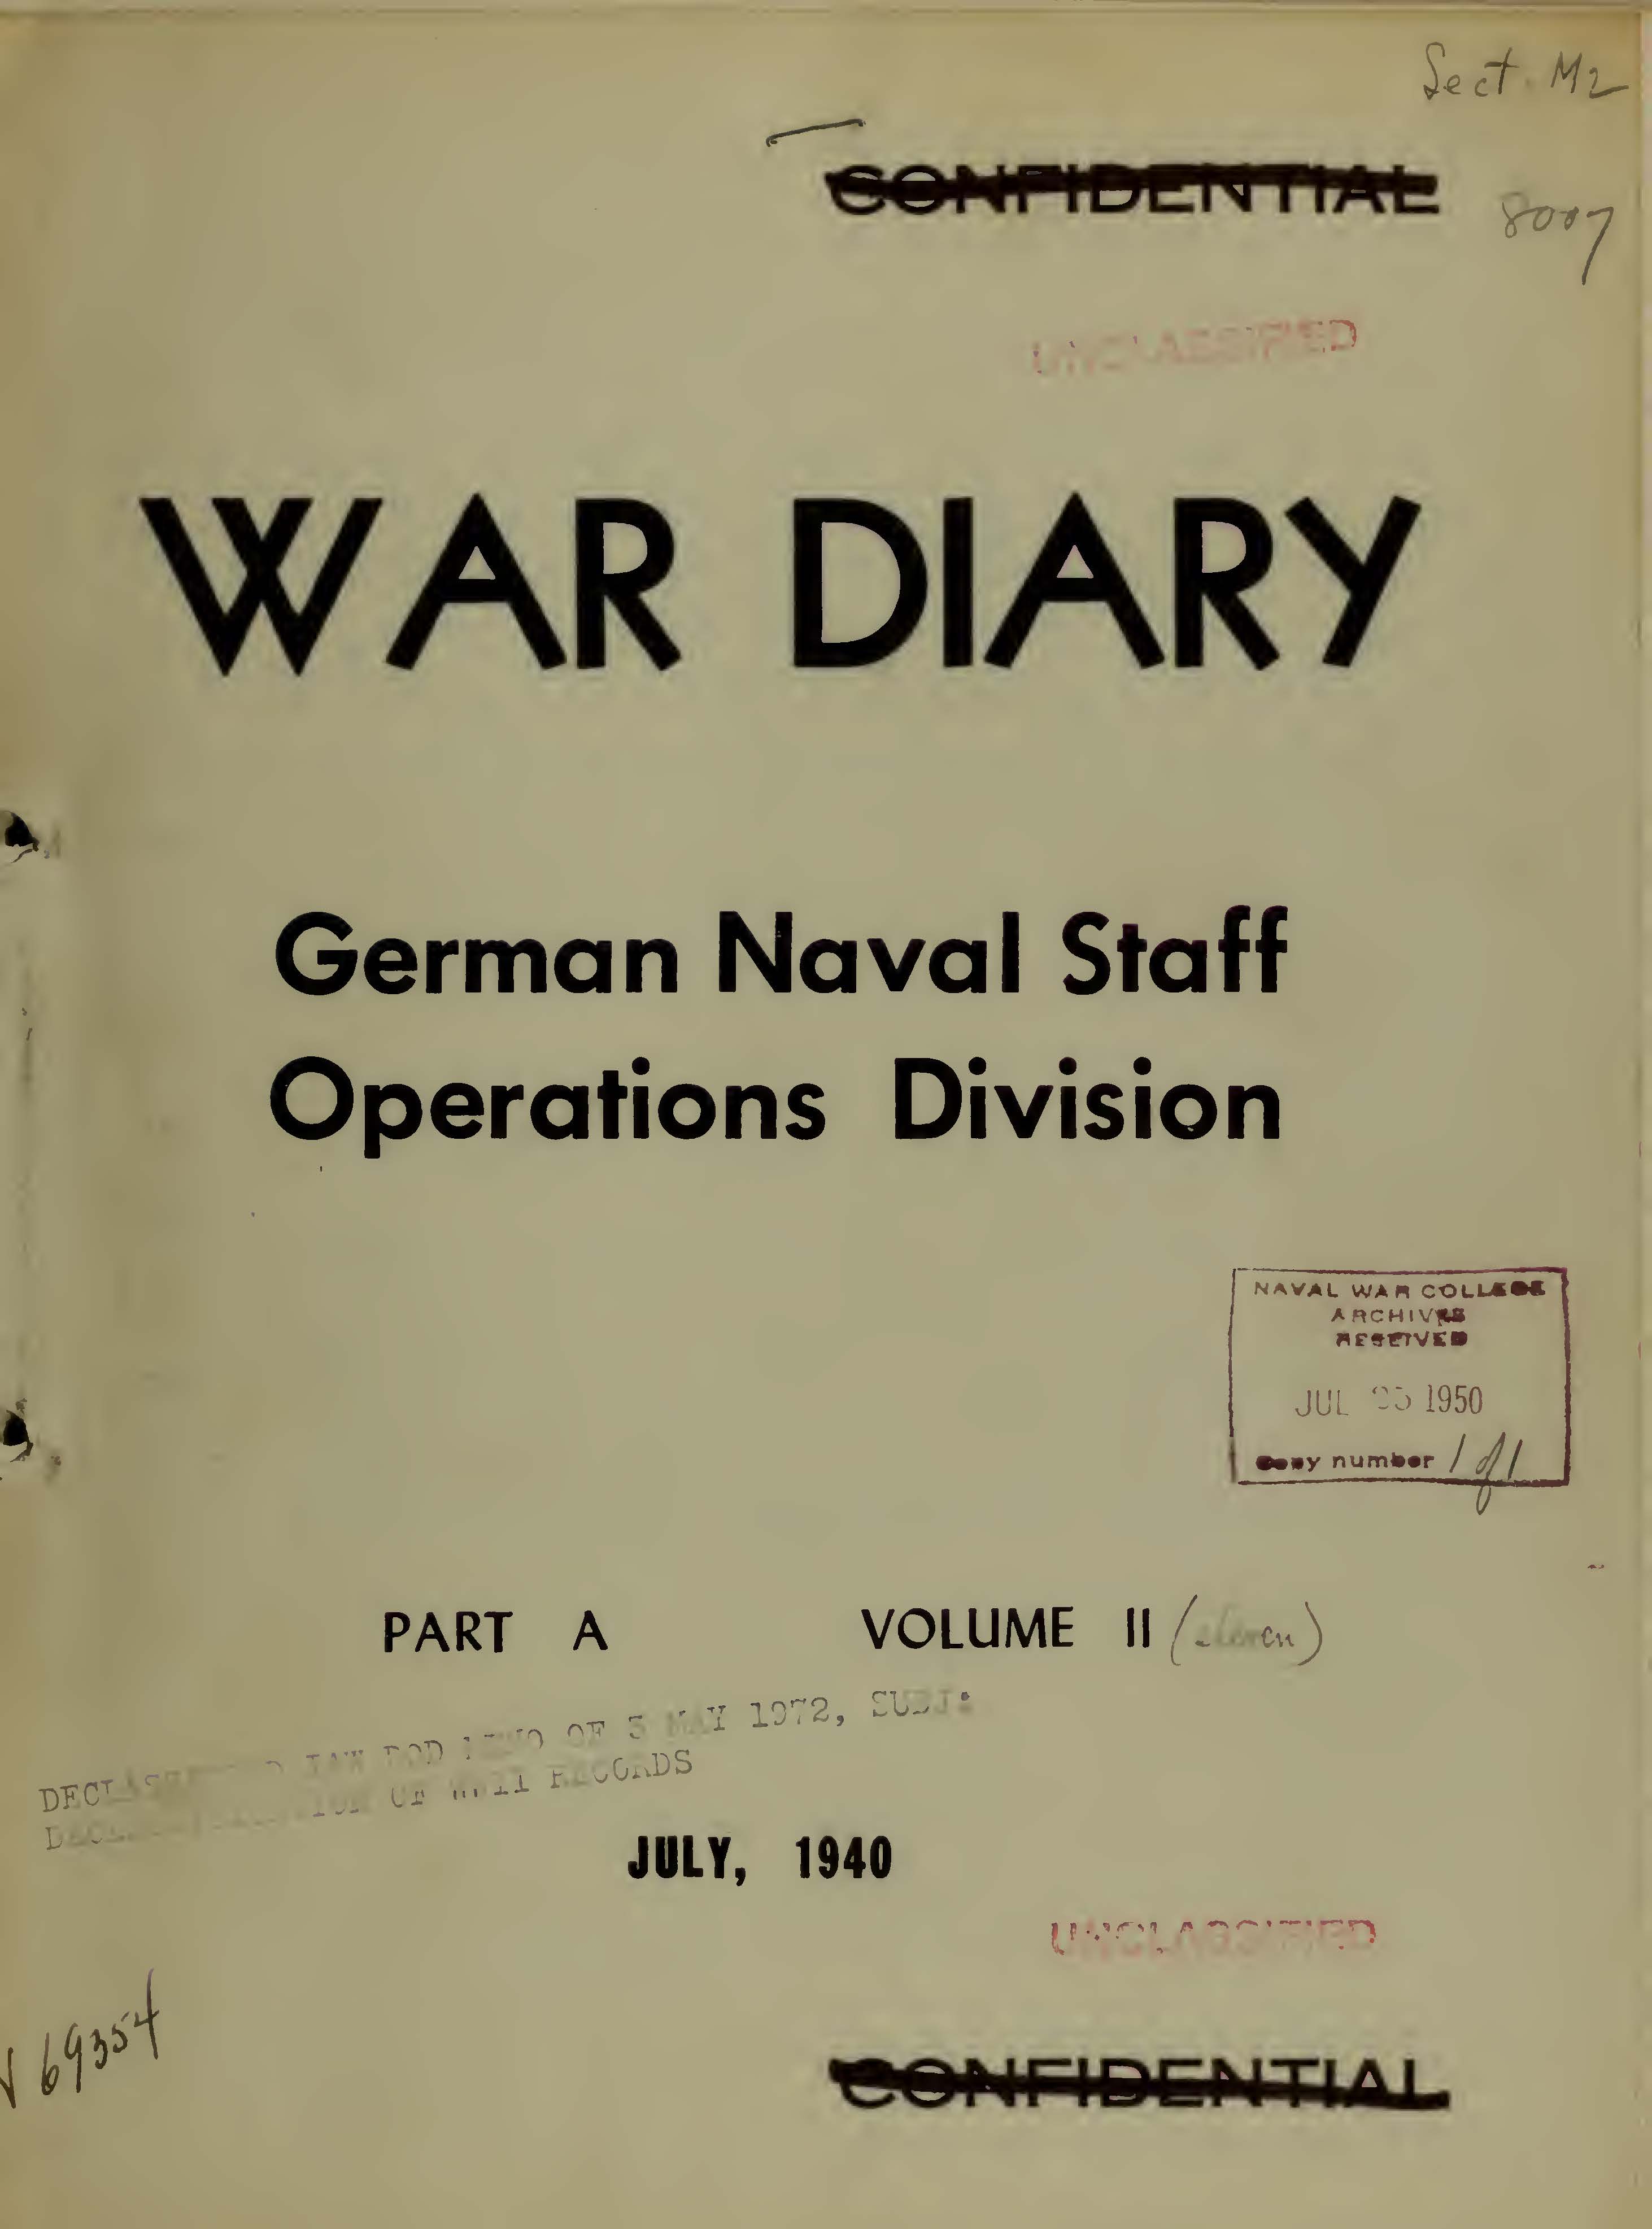 War Diary of German Naval Staff (Operations Division) Part A, Volume 11, July 1940